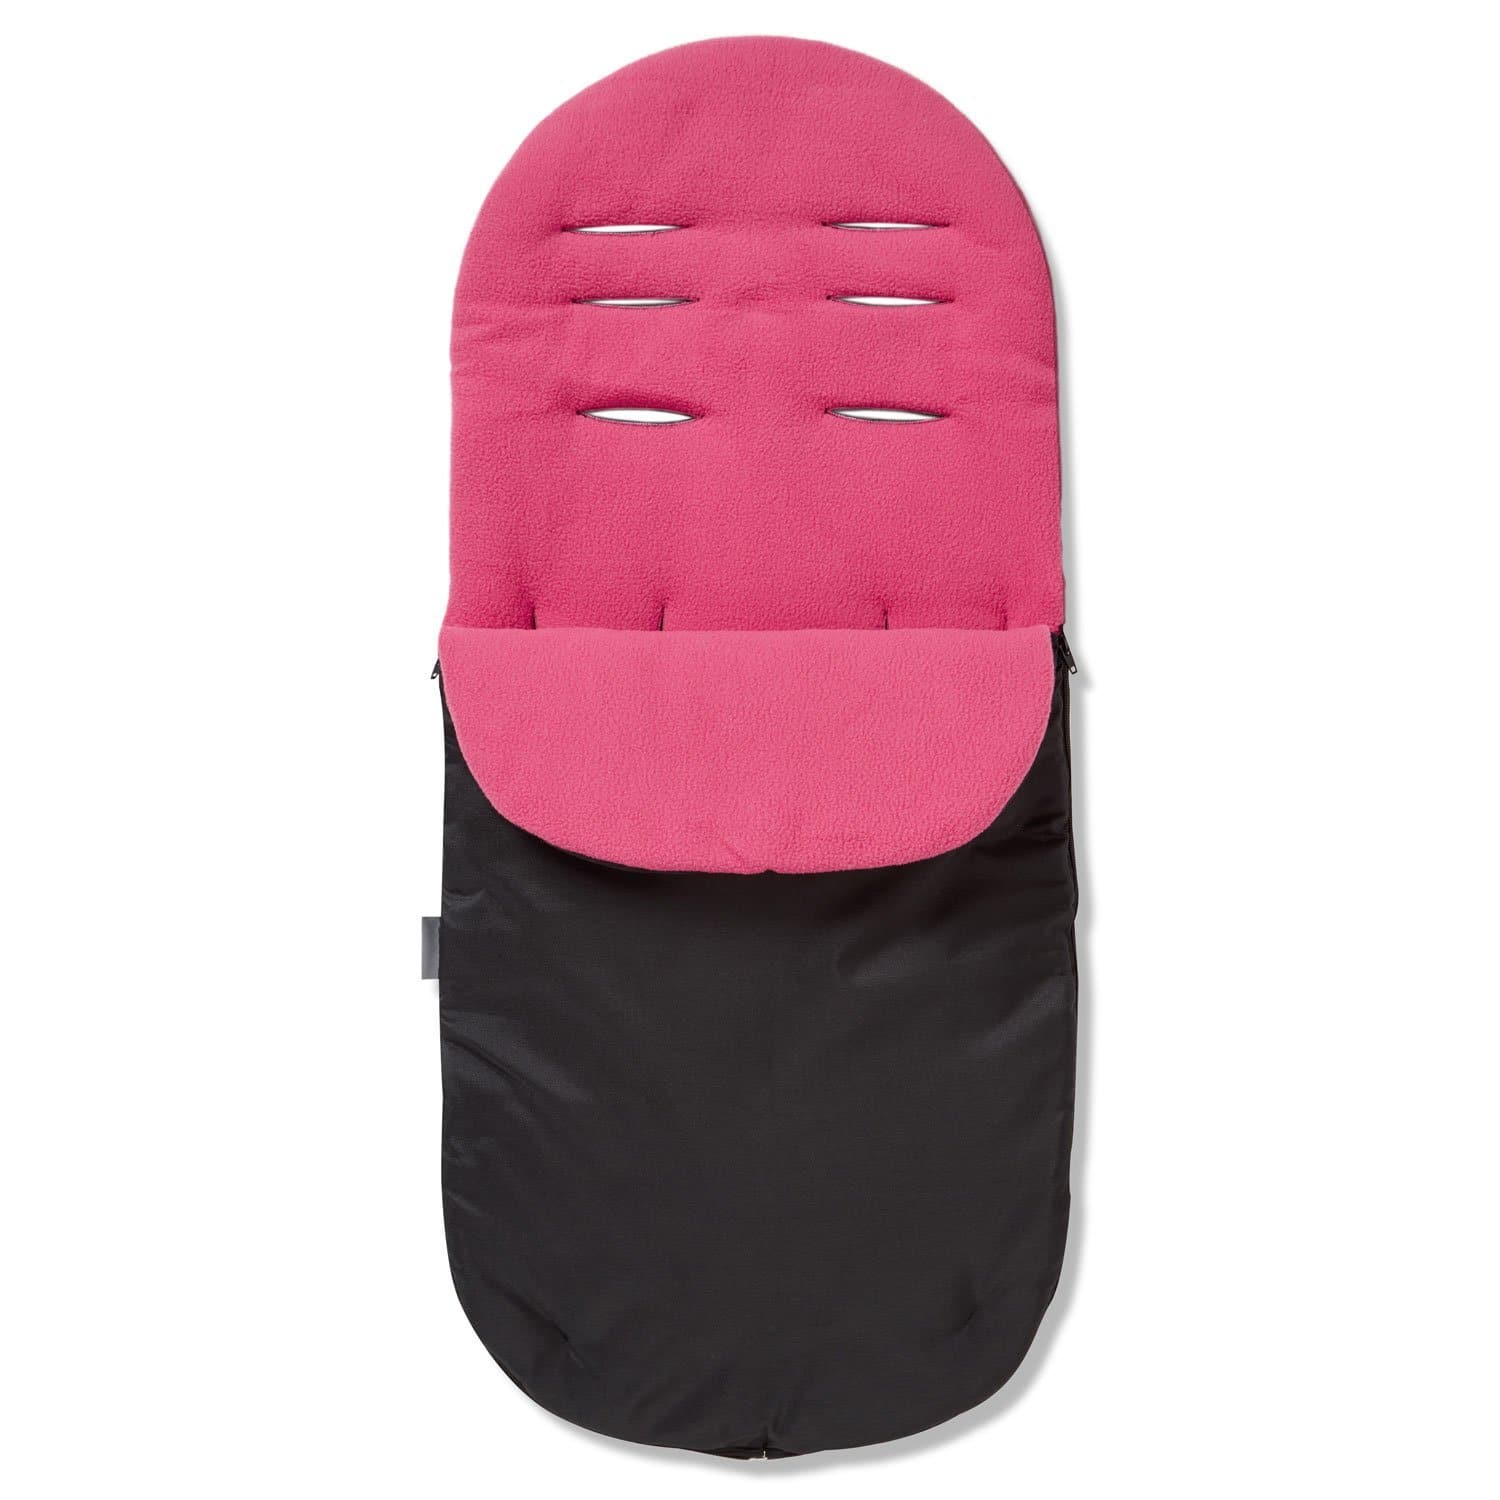 Footmuff / Cosy Toes Compatible with Kiddicare.com - For Your Little One